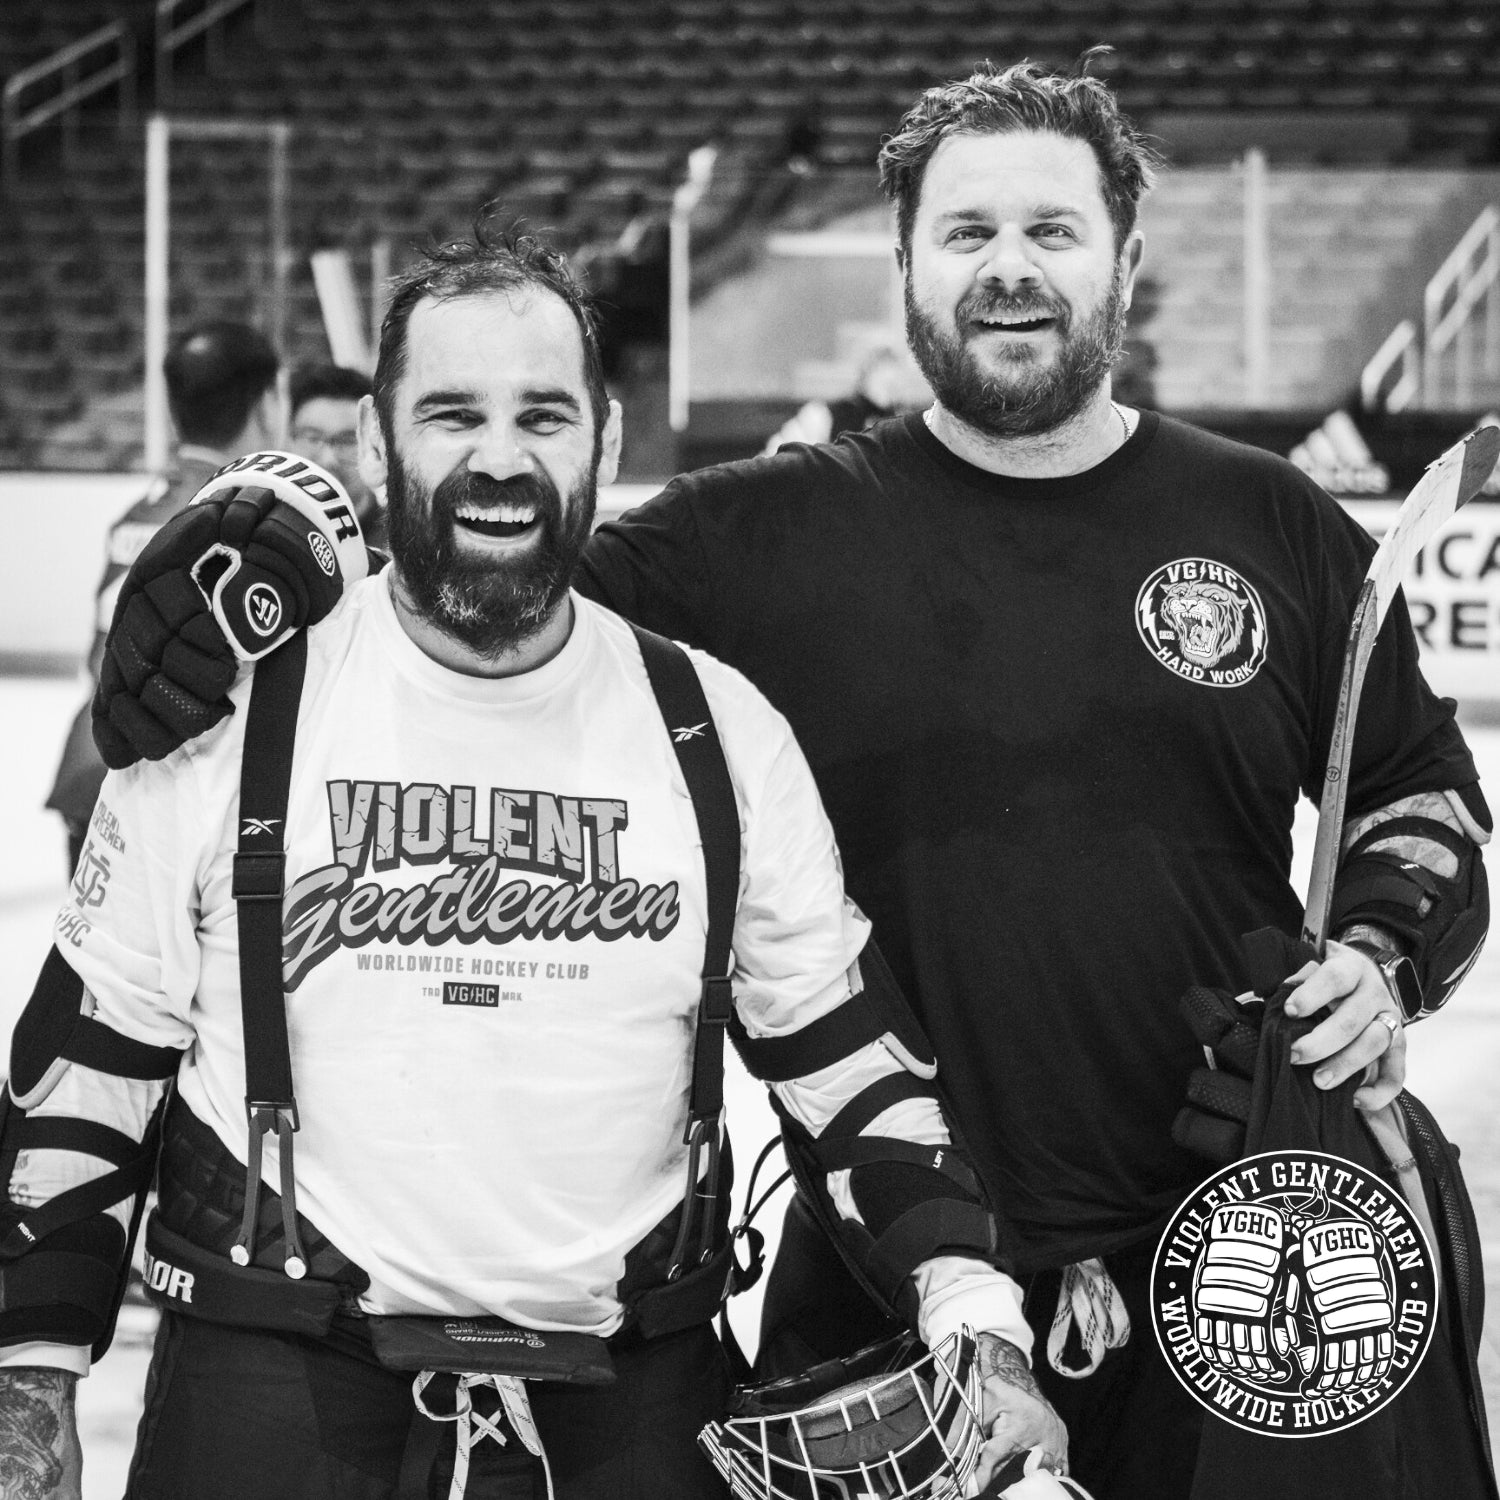 Brian Talbert and Mike Hammer - the two co-owners of Orquest aedelweiss hockey club clothing company started in 2011 